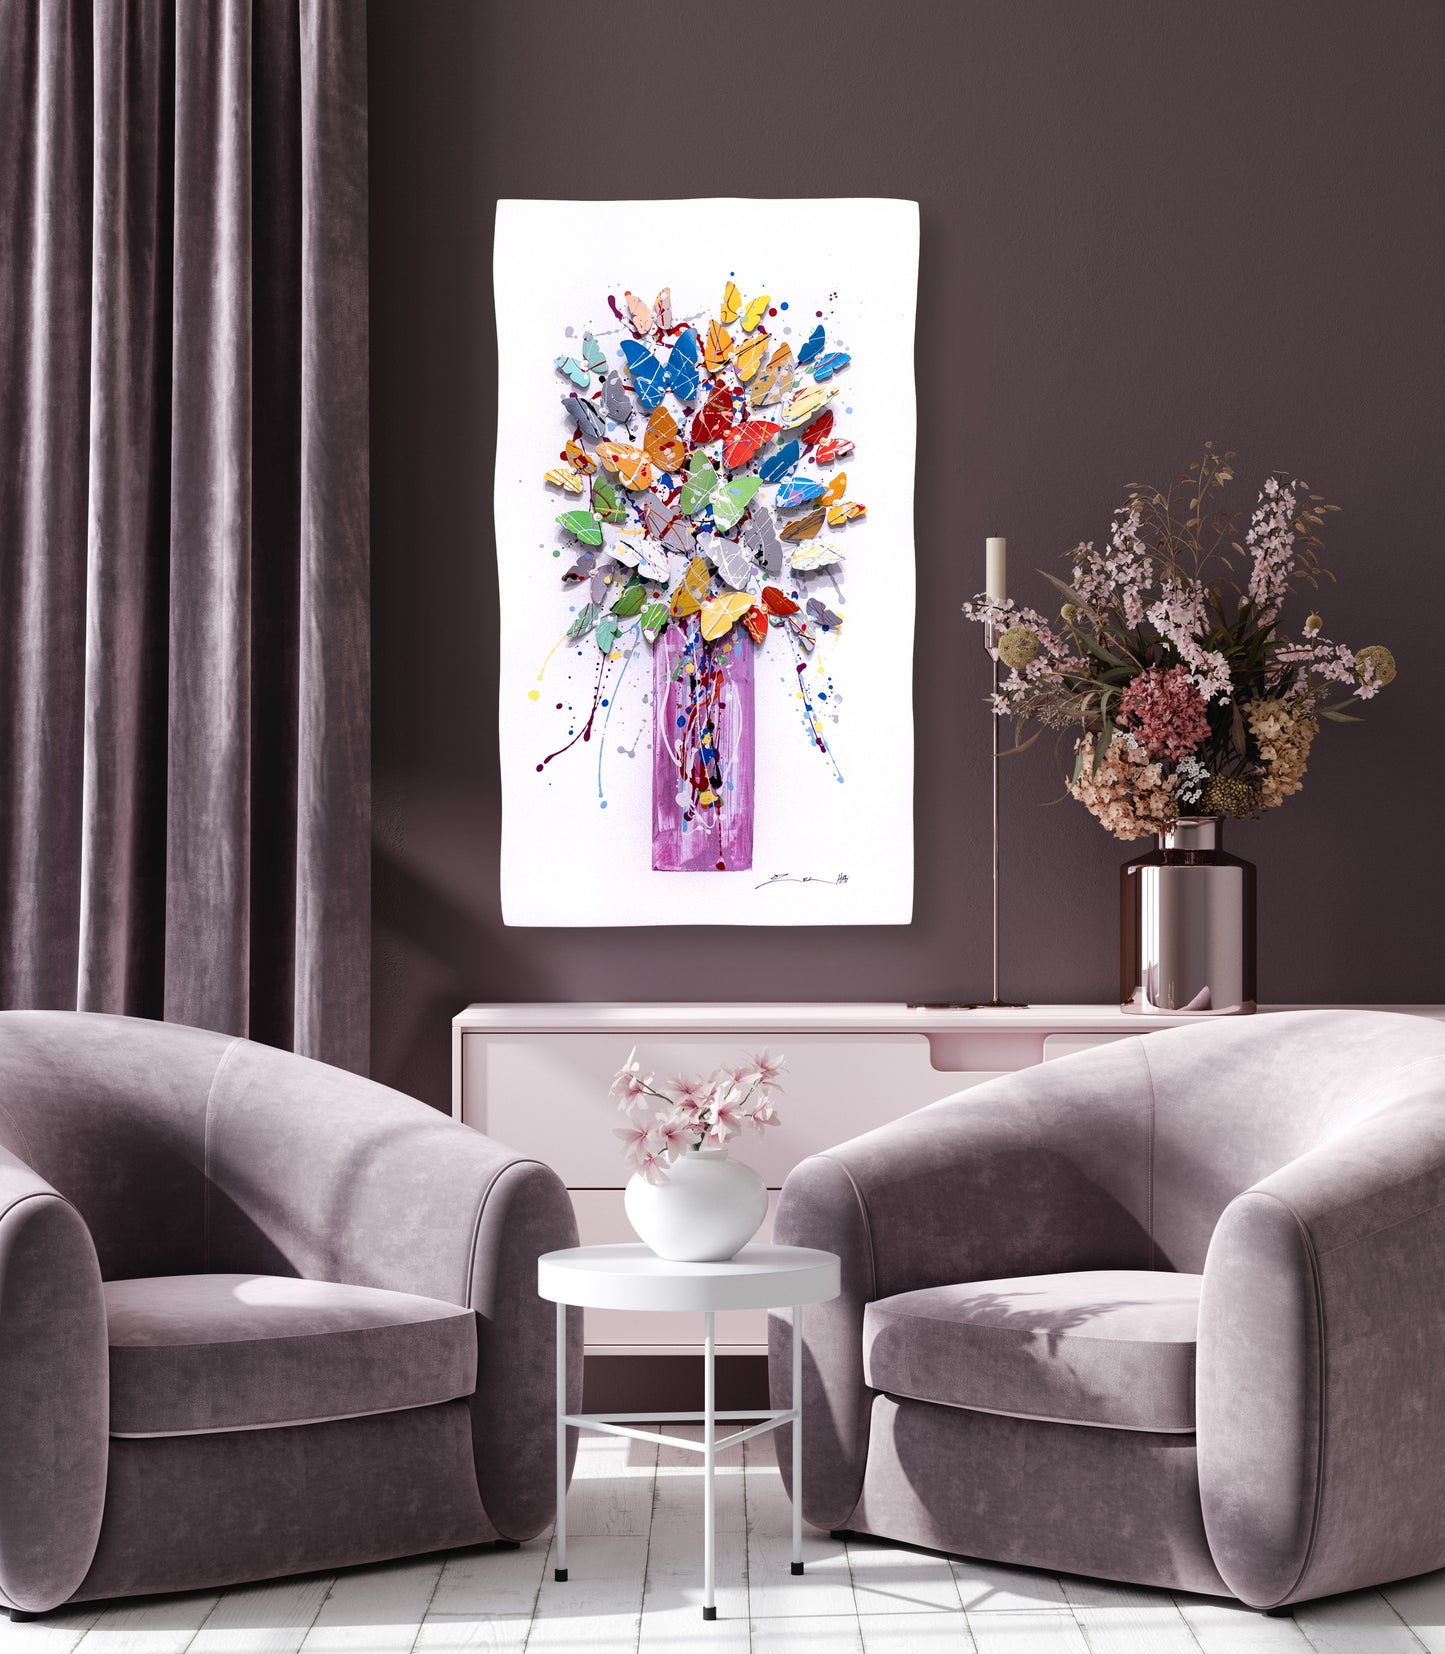 Purple Tree of Life hanged on a wall in an indoor sitting area